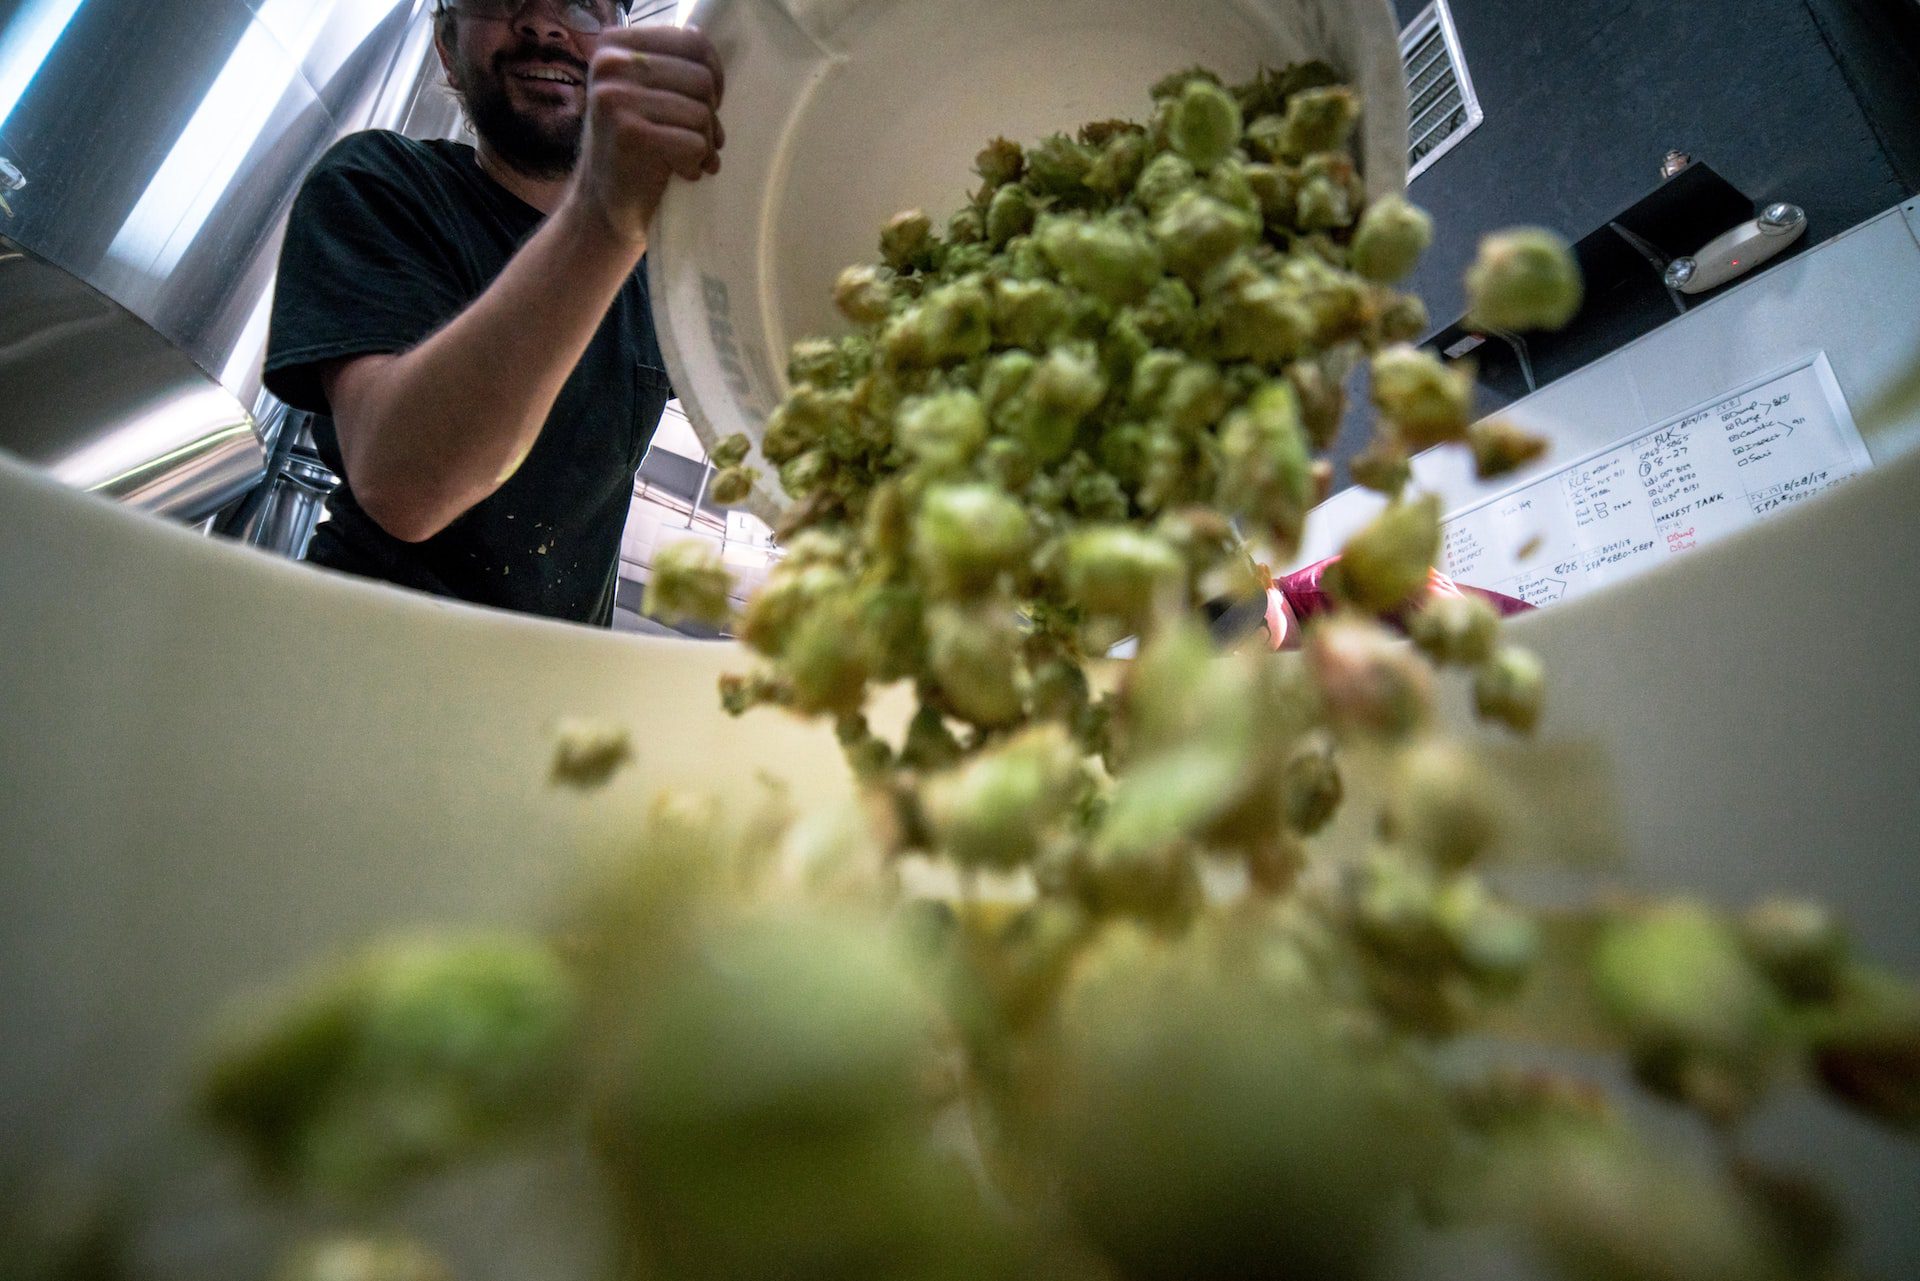 A man pouring hops from a bucket into a sink